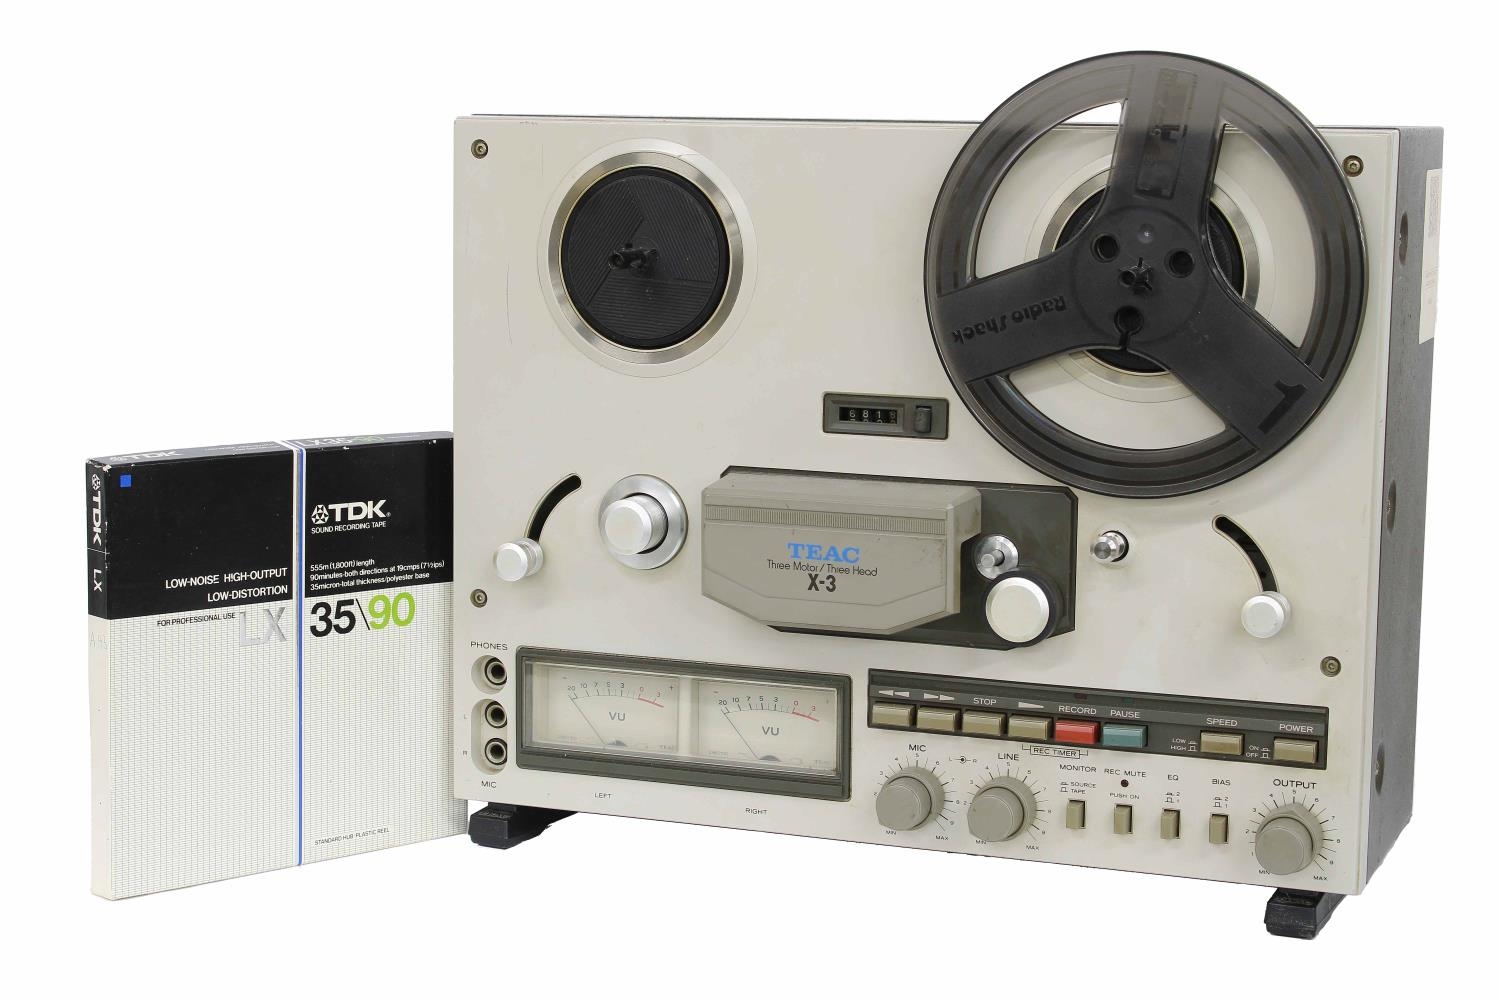 Teac X-3 stereo reel to reel tape recorder, with TDK LX35/90 tape*Please  note: Gardiner Houlgate do